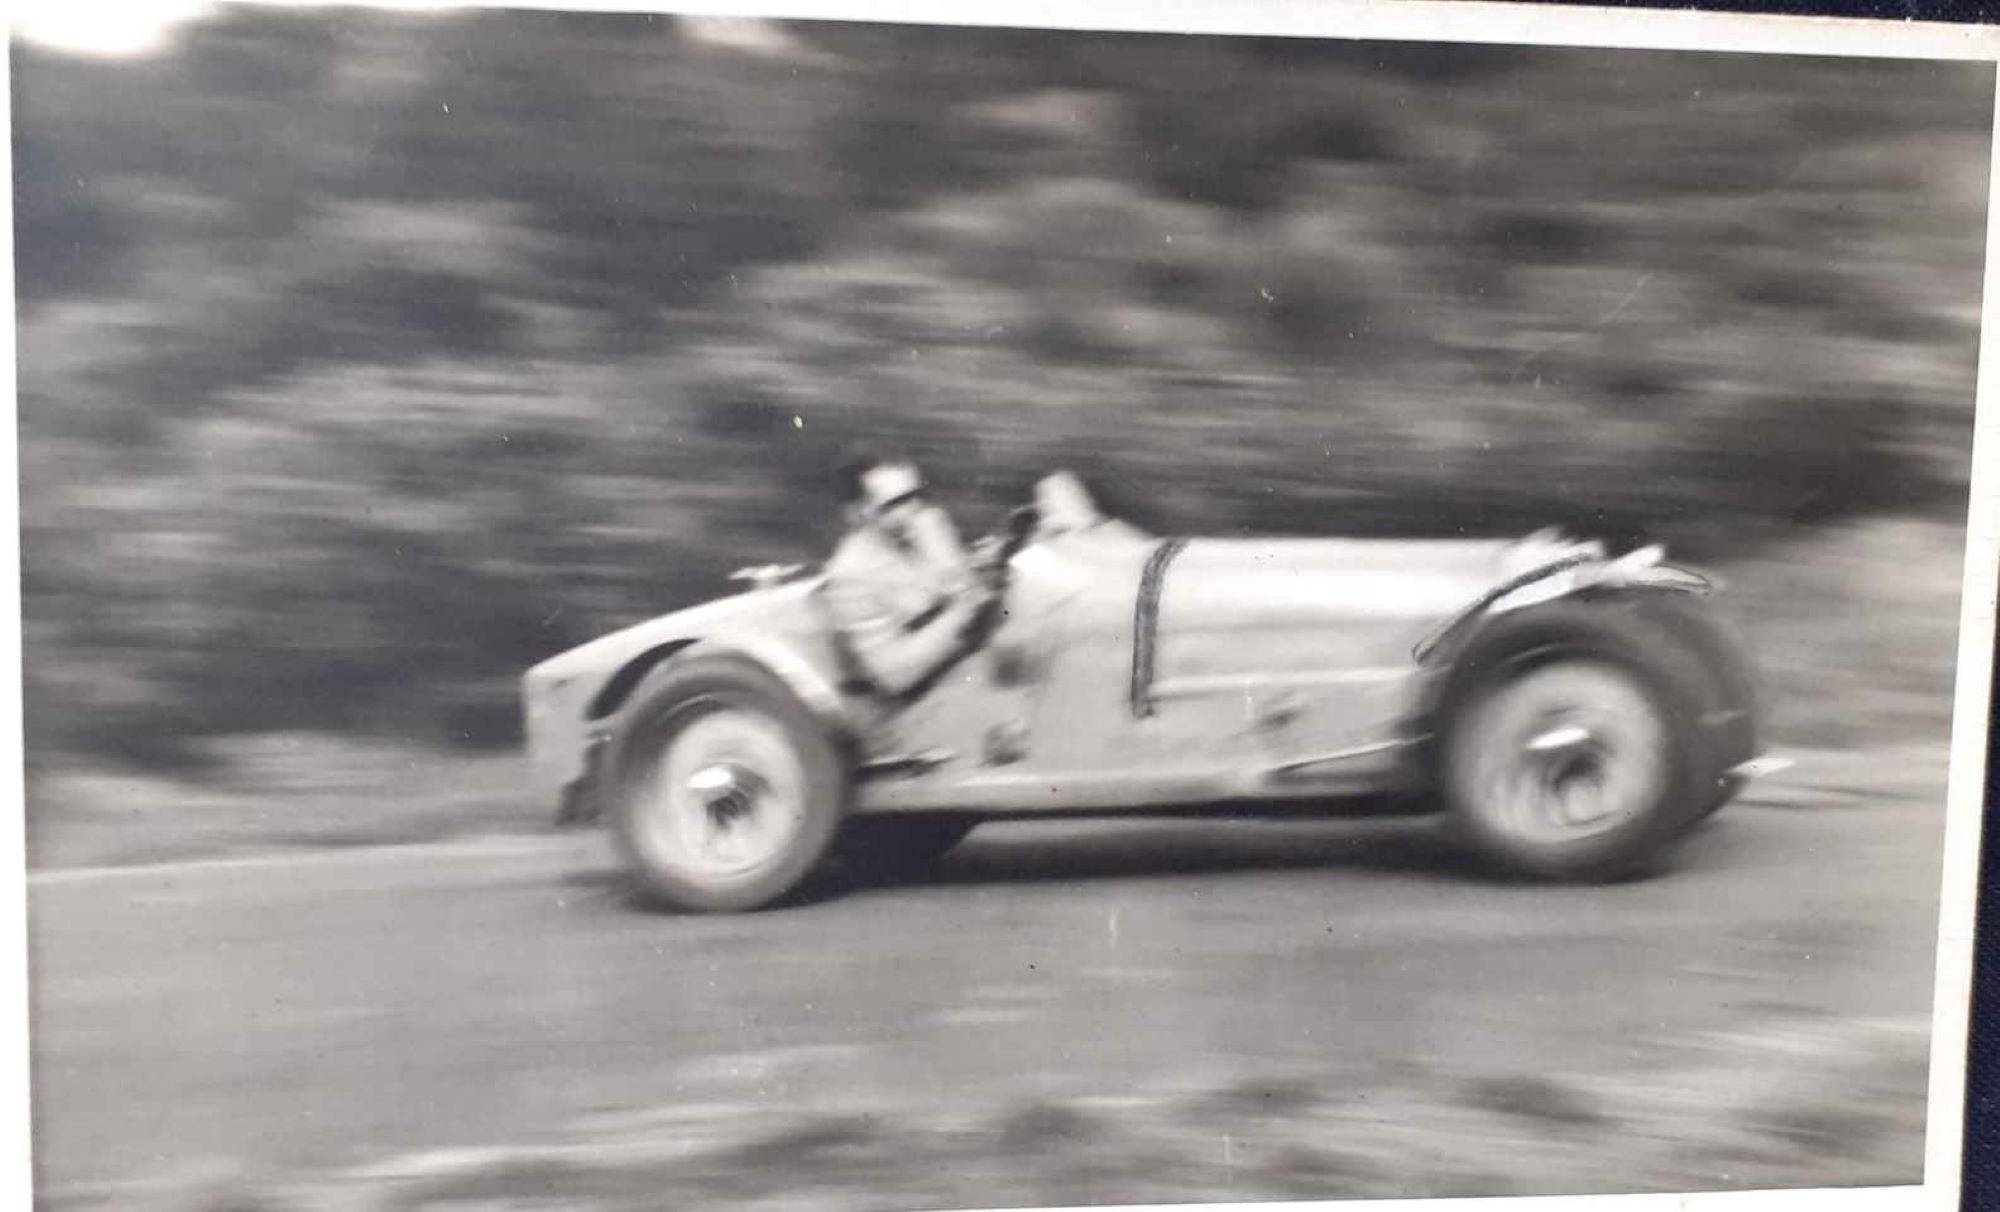 Name:  NSCC 1950 #0116 Bugatti T35 at speed - light colour 1950's - image Graeme Wells arch Anthony Wel.jpg
Views: 193
Size:  158.1 KB